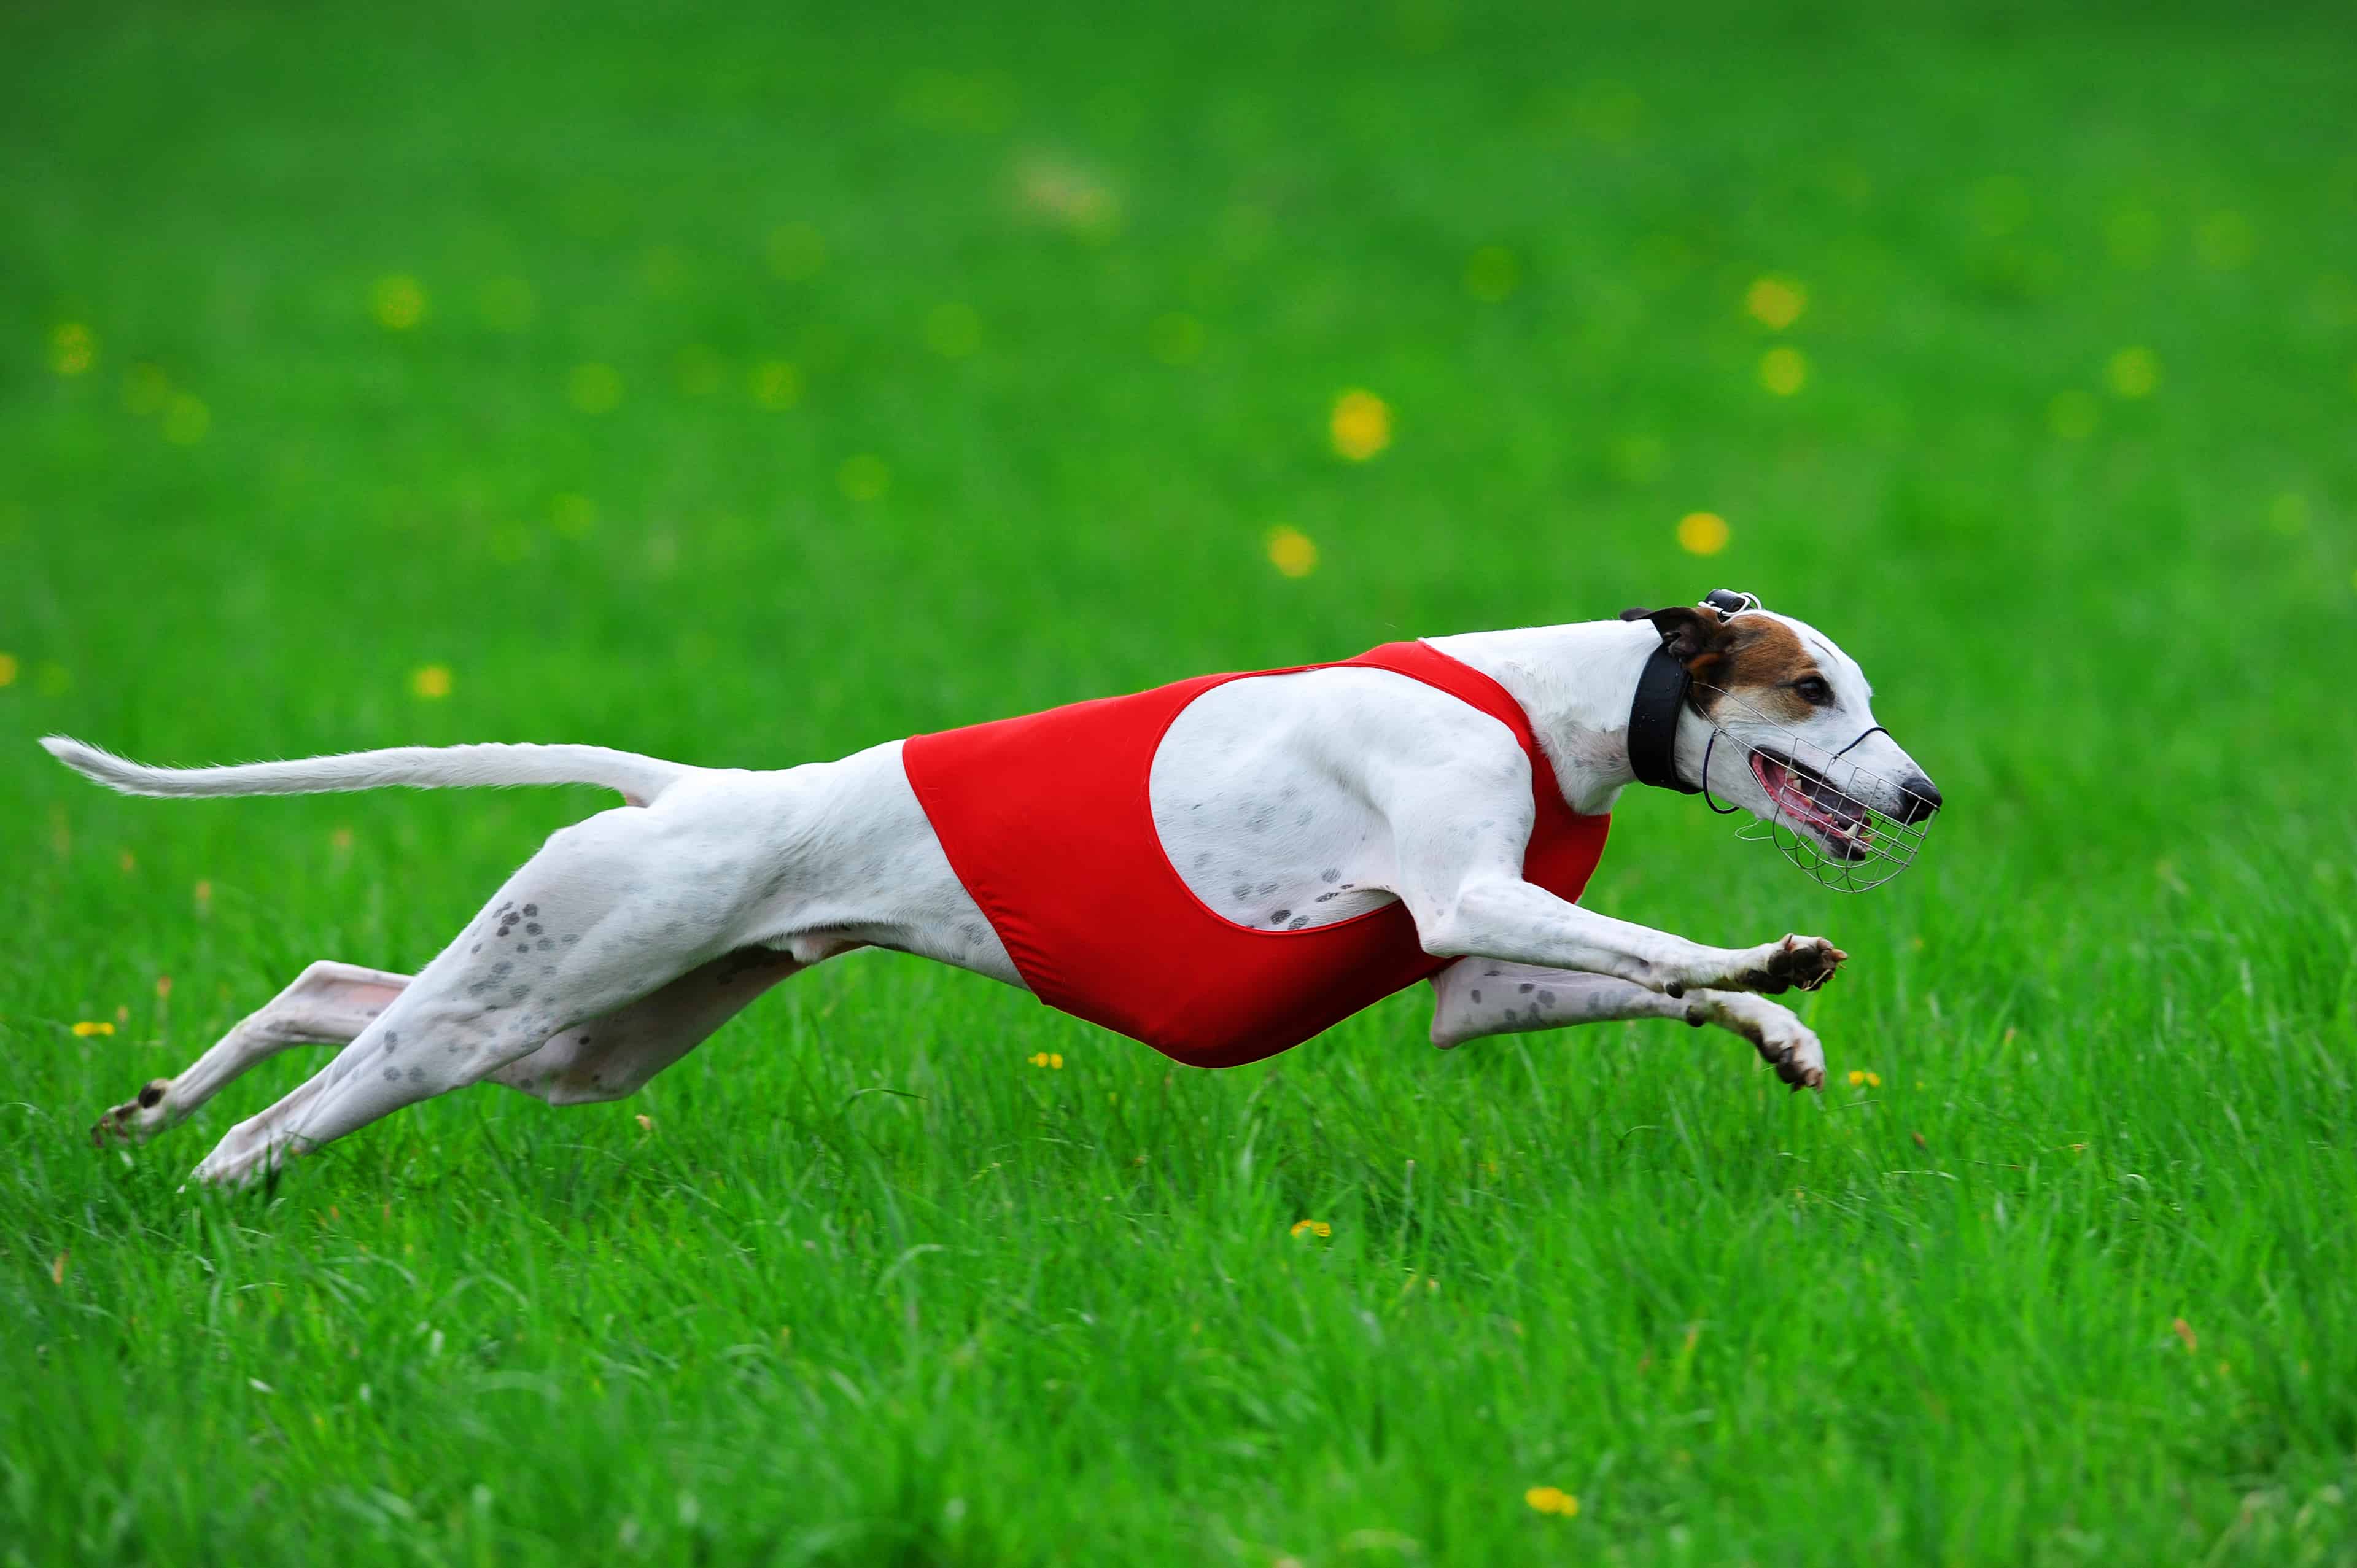 15 Of The Fastest Dog Breeds In The World Highland Canine Training